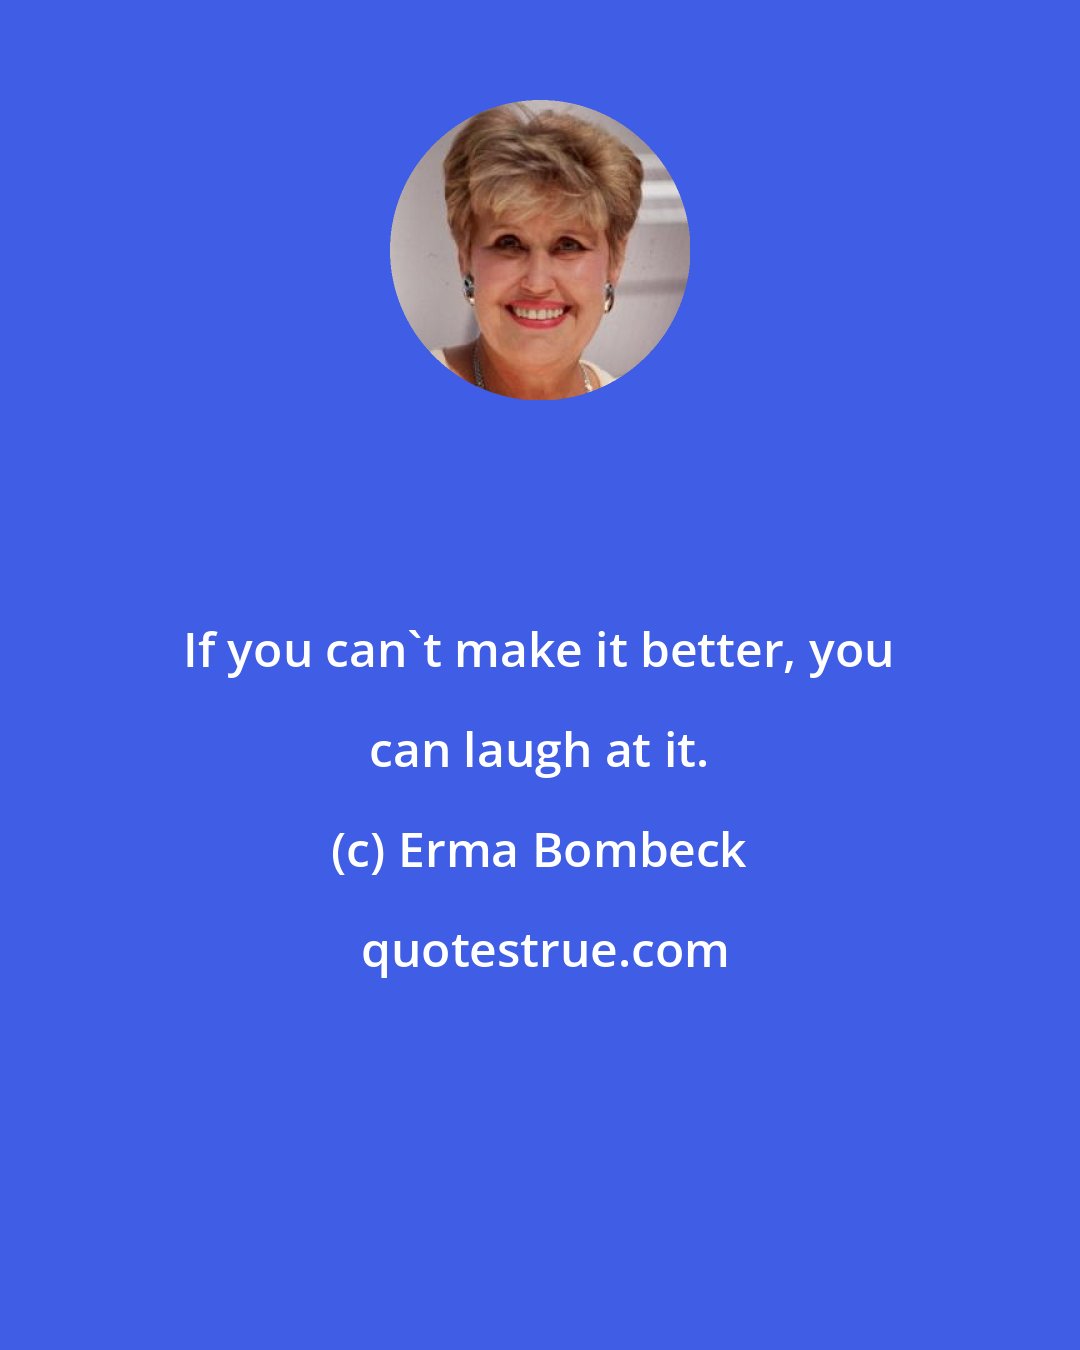 Erma Bombeck: If you can't make it better, you can laugh at it.